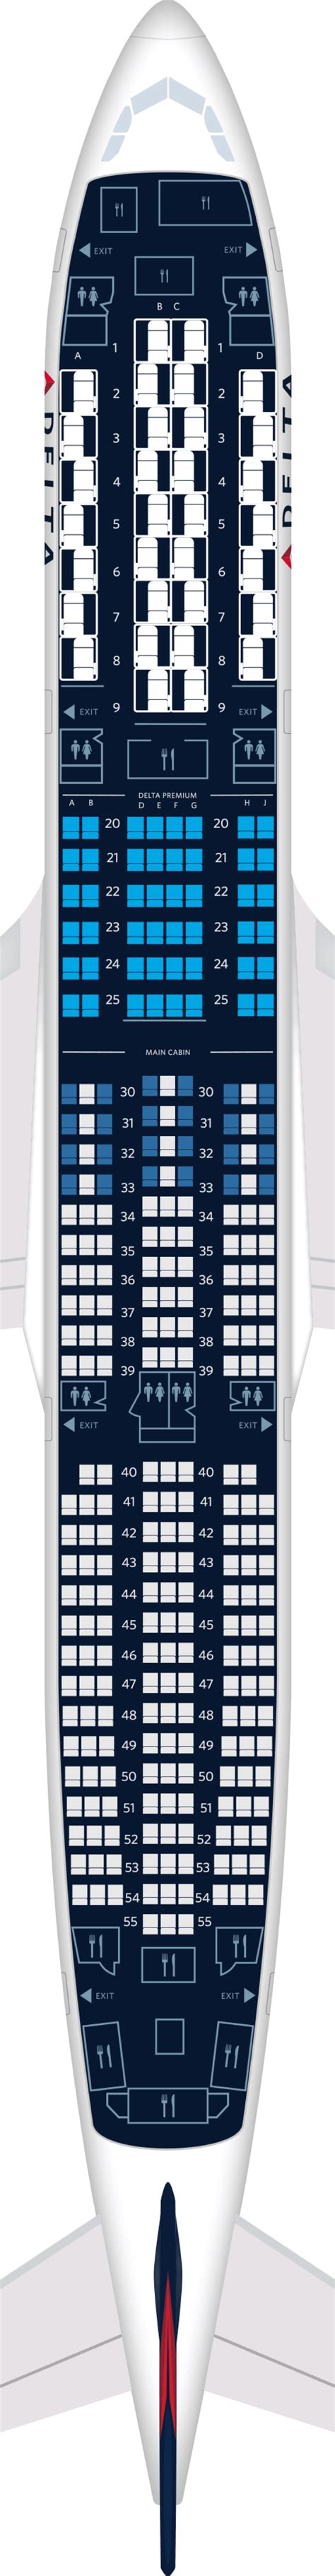 A350 941 seat map. Discover the seatmap and cabins of Air France's Airbus A350 A350-900 - 324 seats Features Length in meters: 66.80 Wingspan in meters: 64.75 Cruising speed: Mach .85 Cruising altitude: 10,700 m / 35,000 ft 